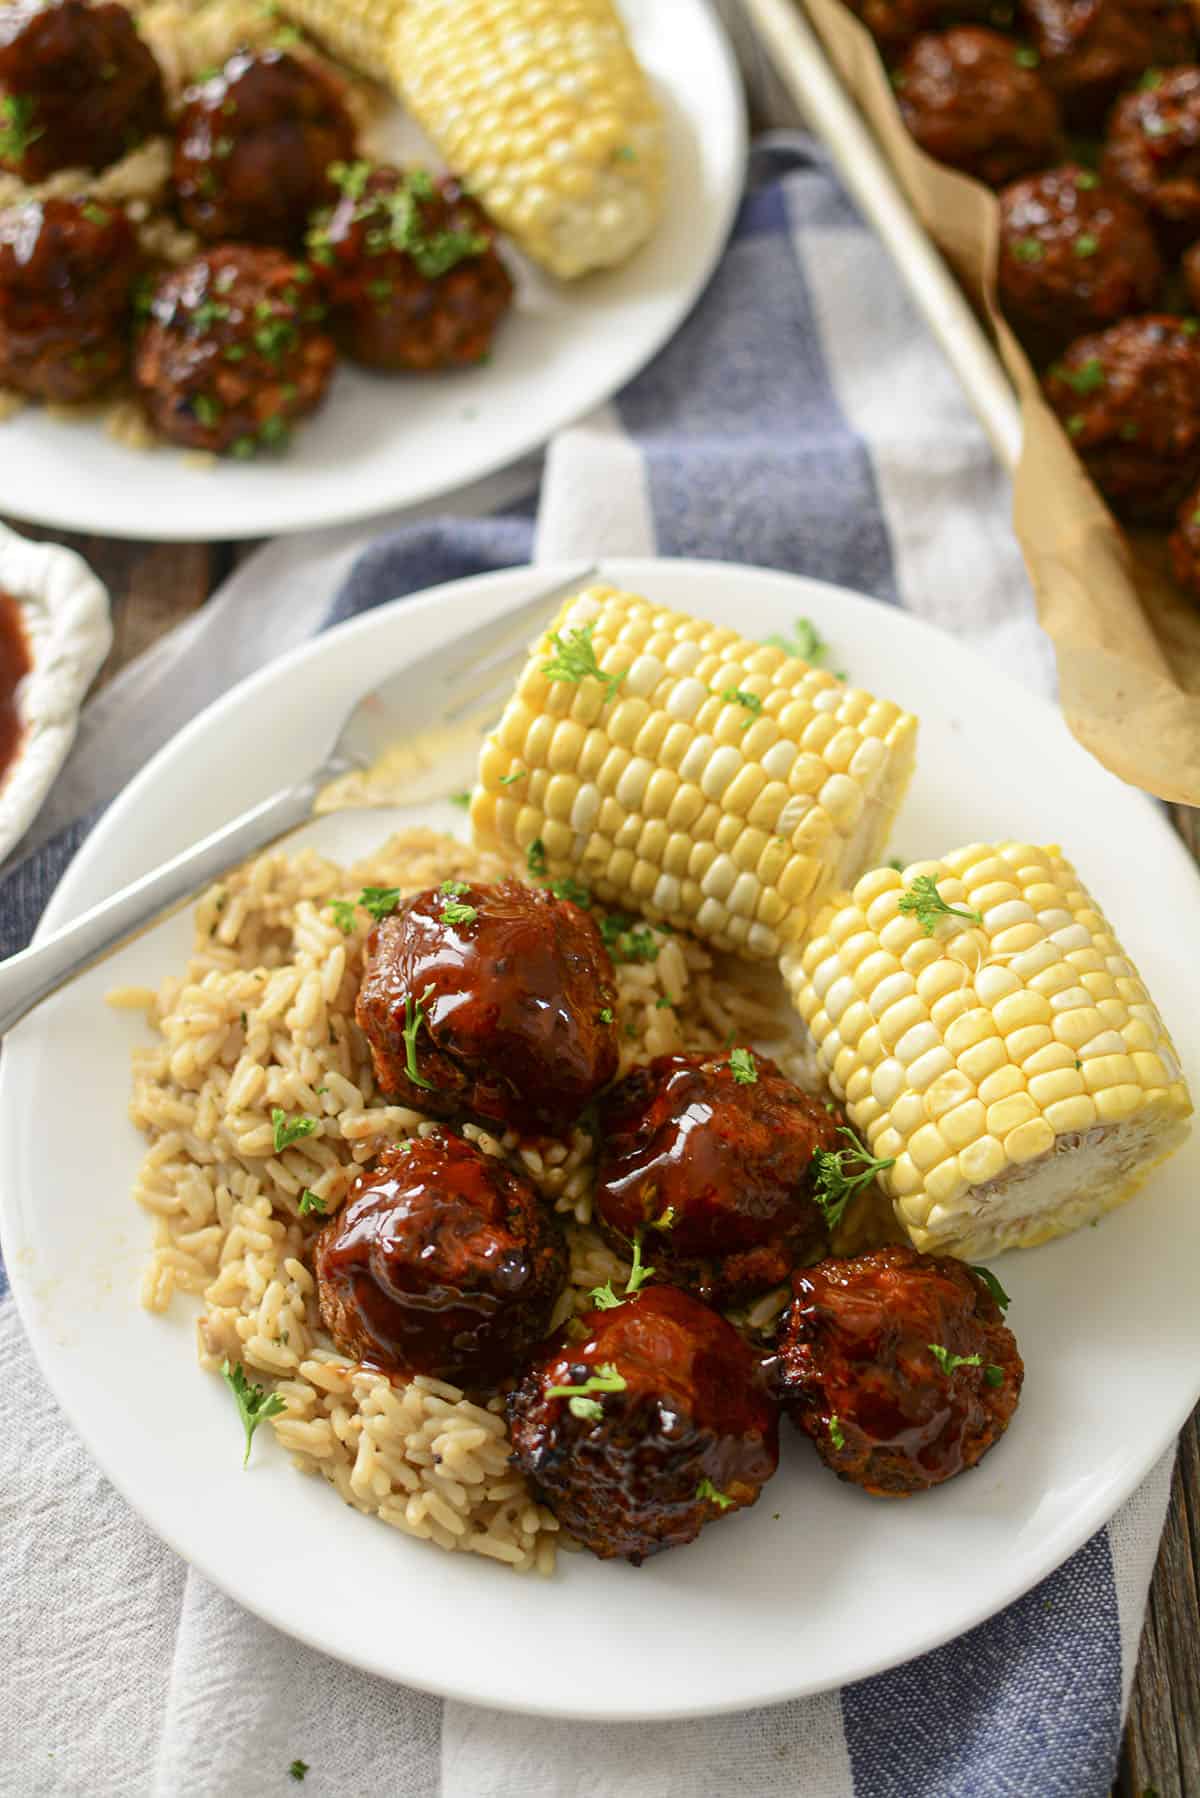 5 Meatballs on rice with corn on the cob.